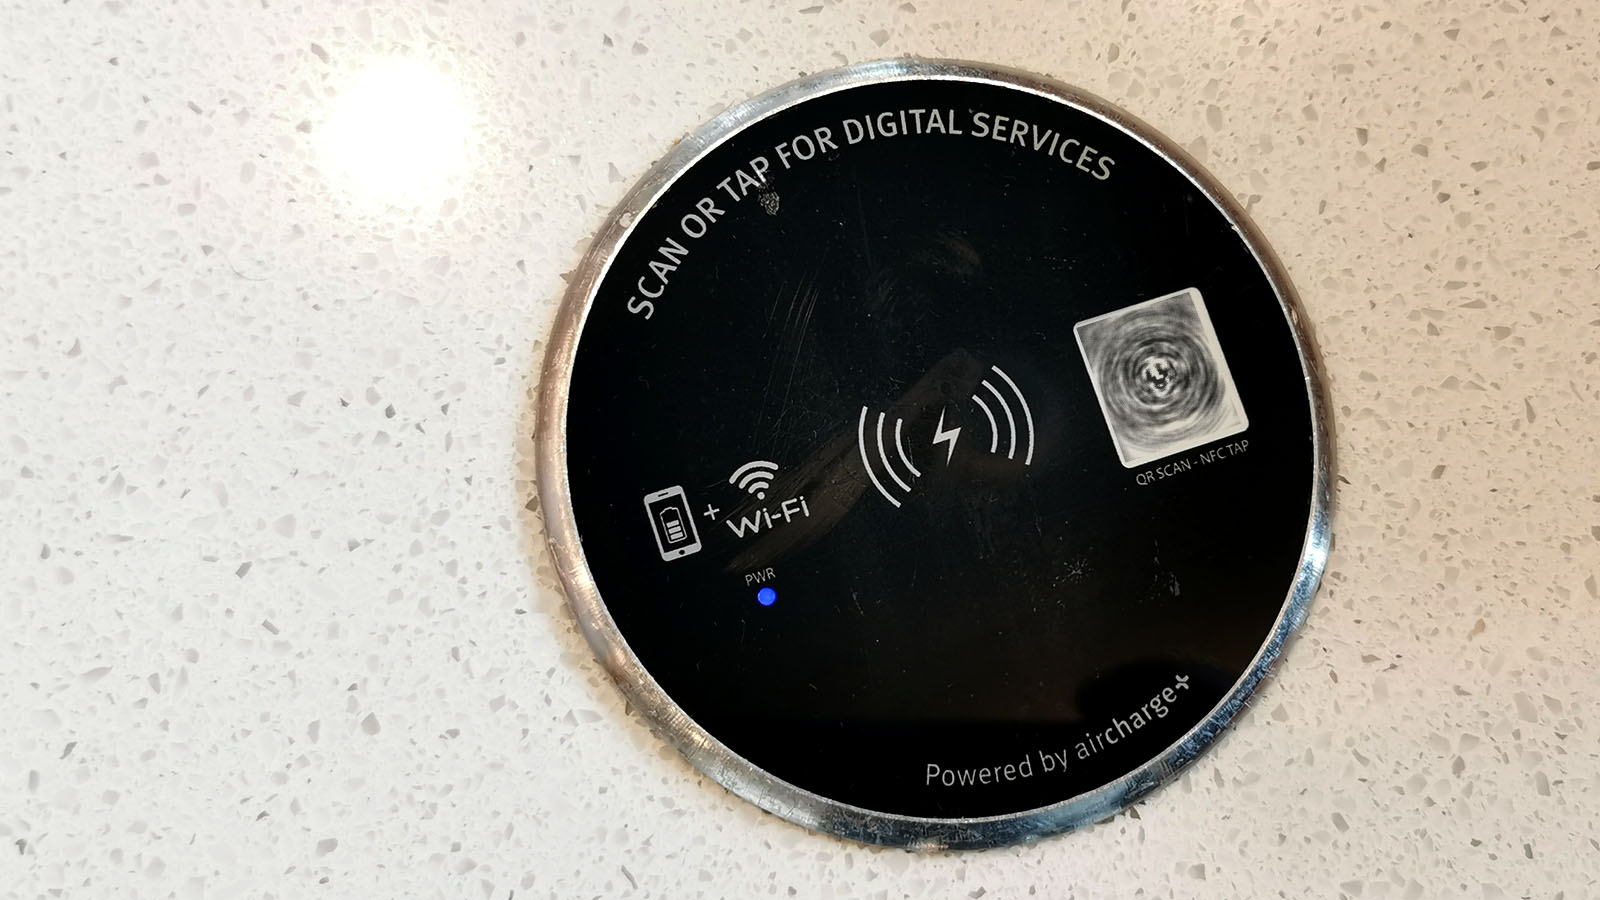 Charge your phone in the Delta Sky Club New York JFK T4B